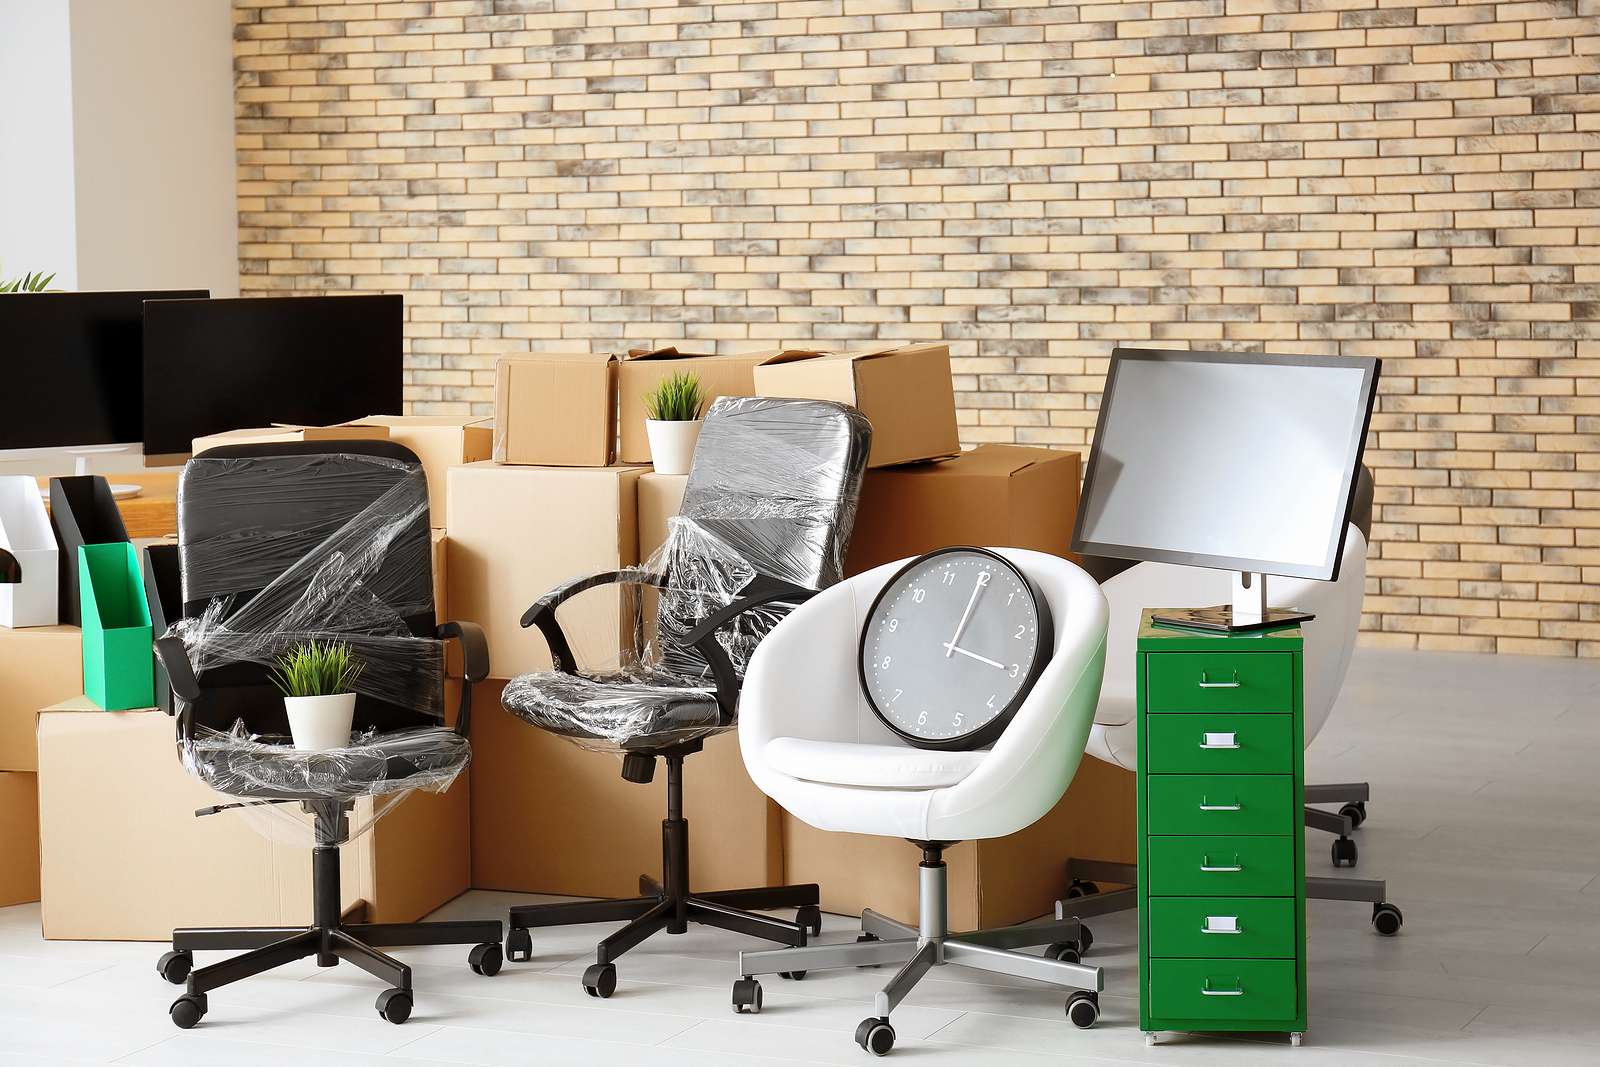 Corporate Office Moving Checklist to Minimize Downtime